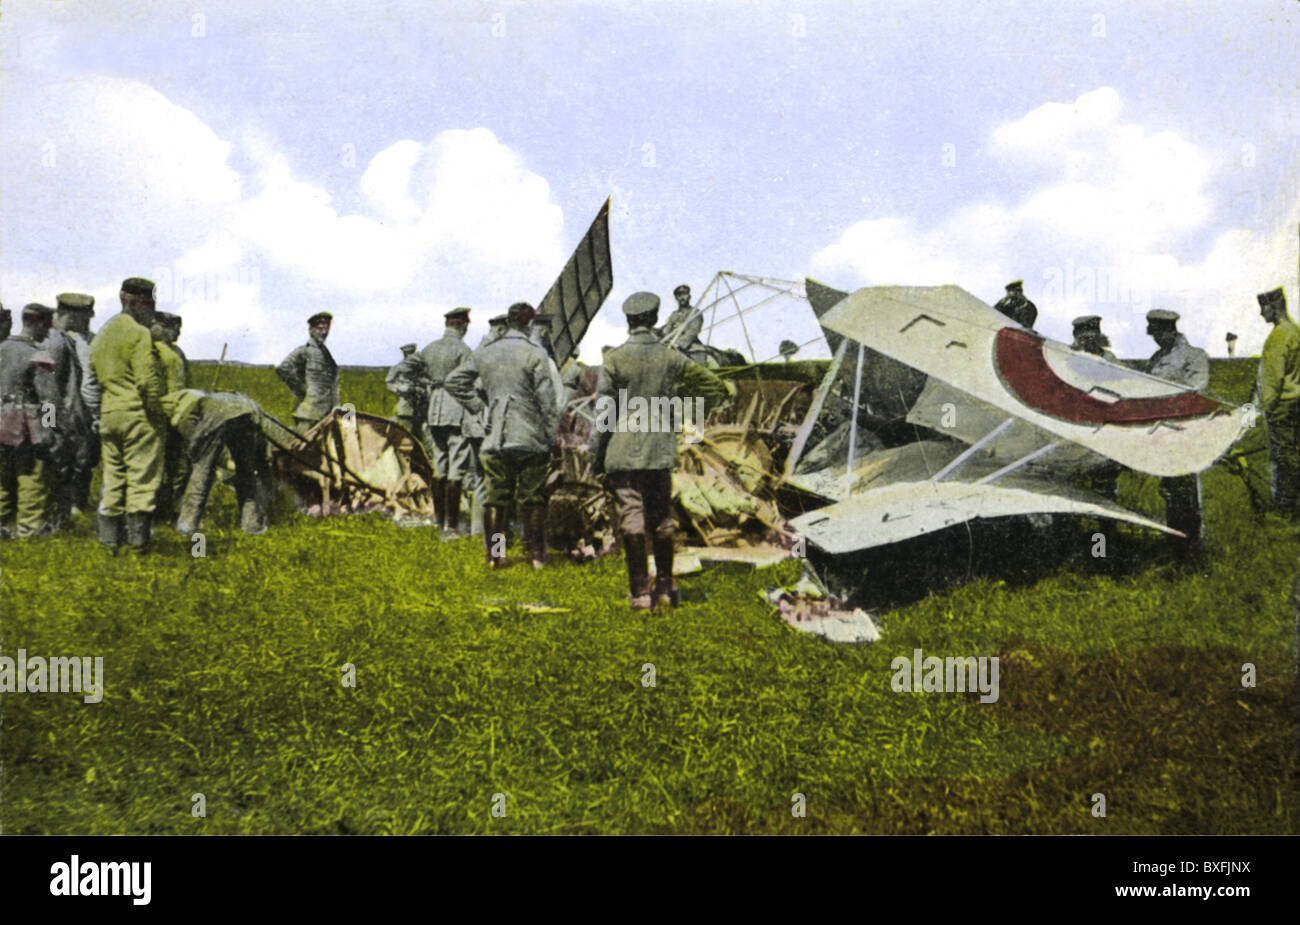 First World War / WWI, Western front, Belgium, shot down French aircraft, Belgium, 1916, Additional-Rights-Clearences-Not Available Stock Photo